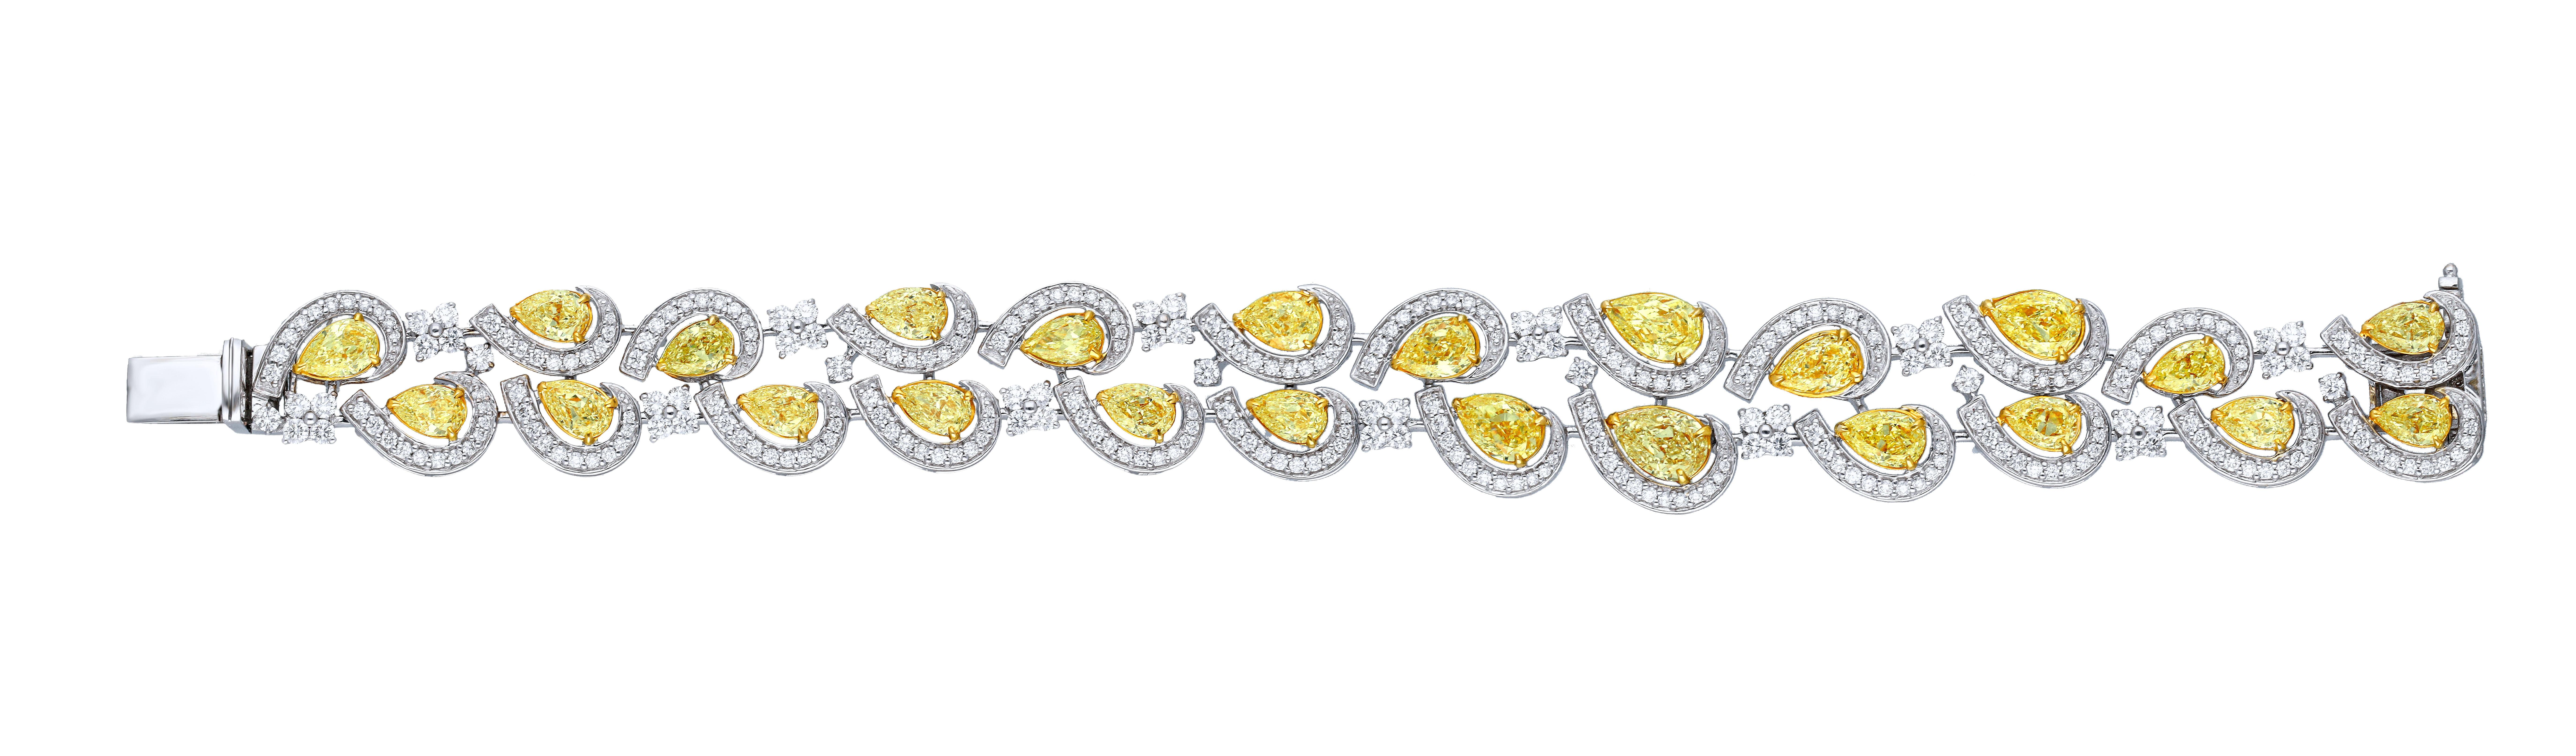 This double line pear shaped natural fancy yellow diamond bracelet has 9.52ct of pear shaped fancy yellow diamond with a row of white diamond flowing on its side. Pear shaped diamonds are mounted in random fashion giving this bracelet and endearing